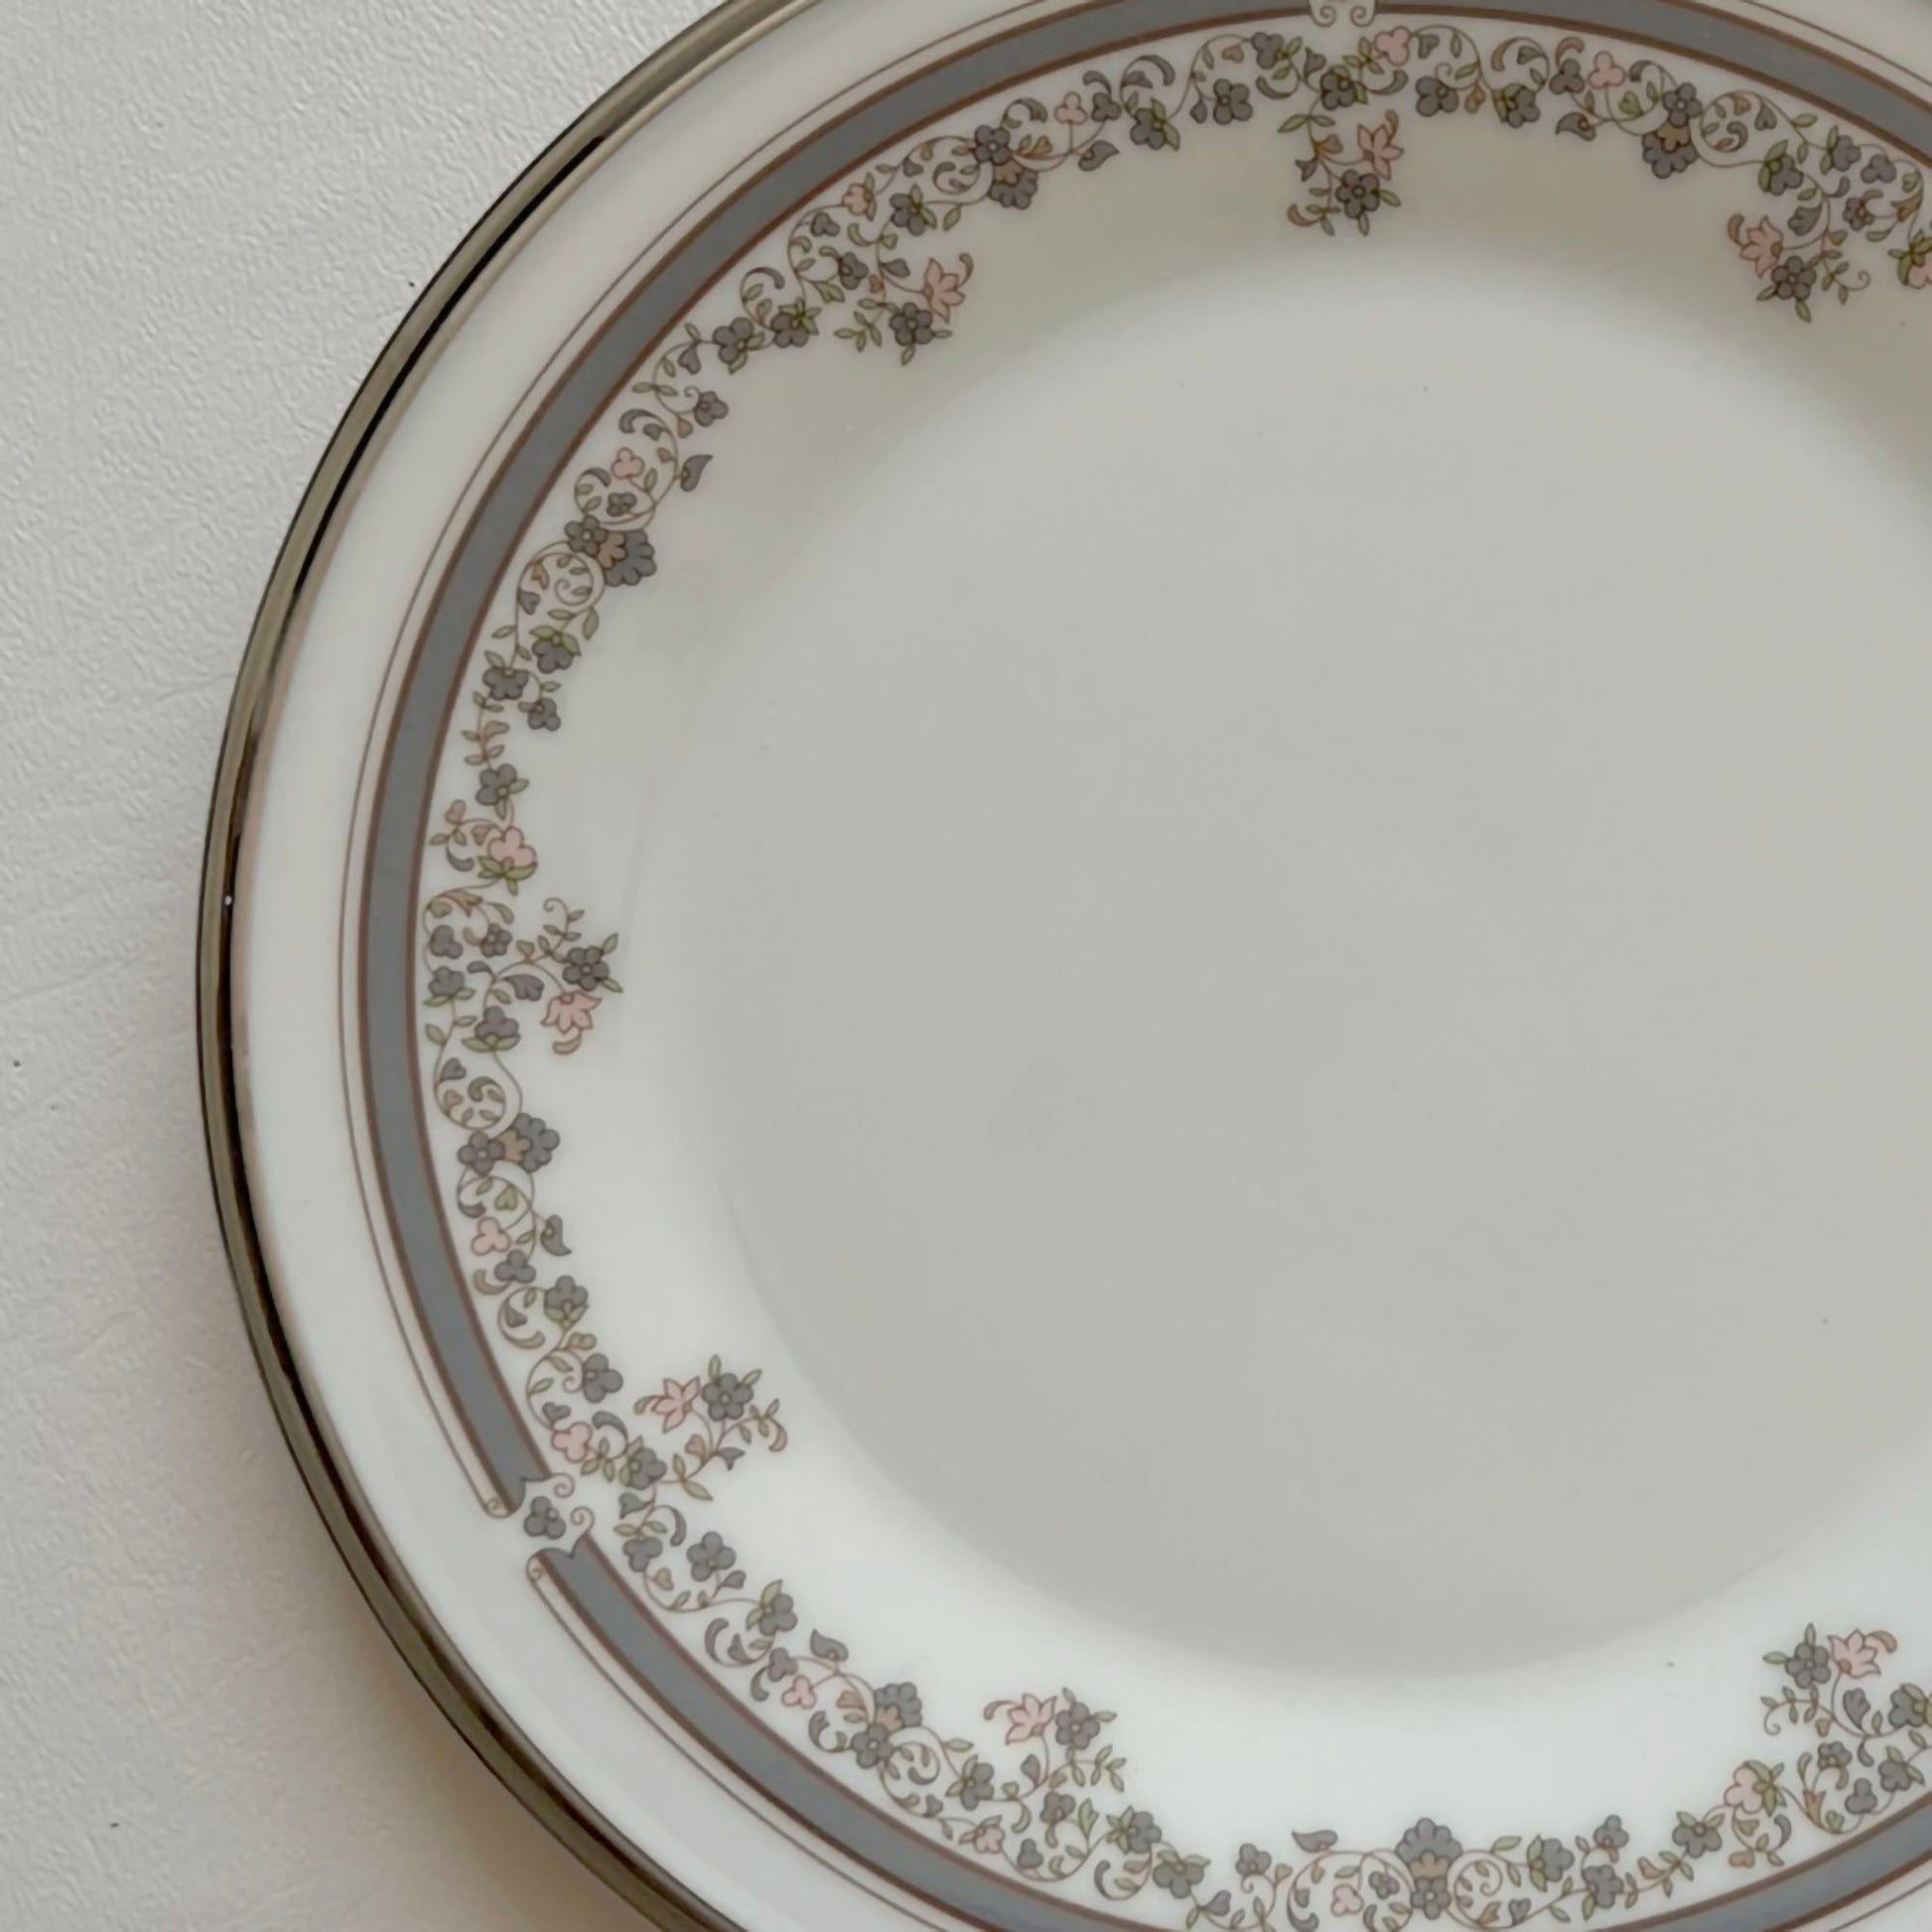 Lenox-Lace-Point-Floral-China-10.75-in-Dinner-Plate.-Close-up-view.-Shop-eBargainsAndDeals.com.